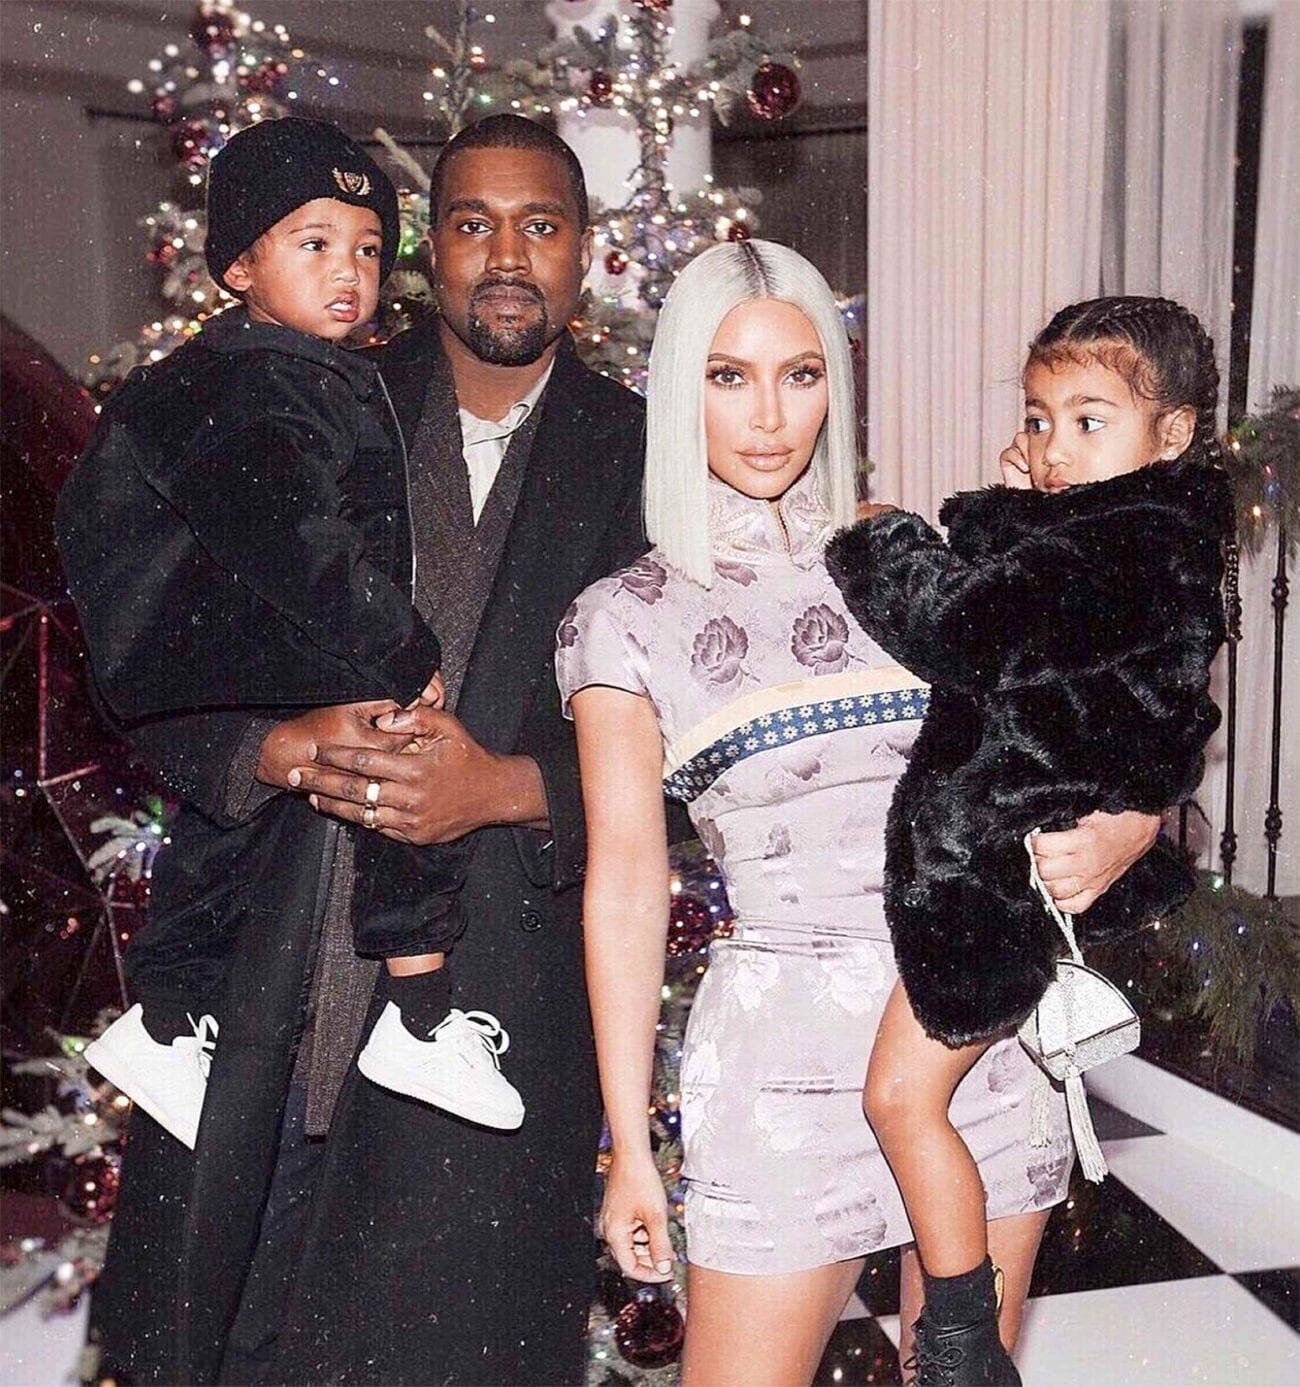 During a global pandemic Kimye West and their social media posts have stung even more. Here are some of the worst.